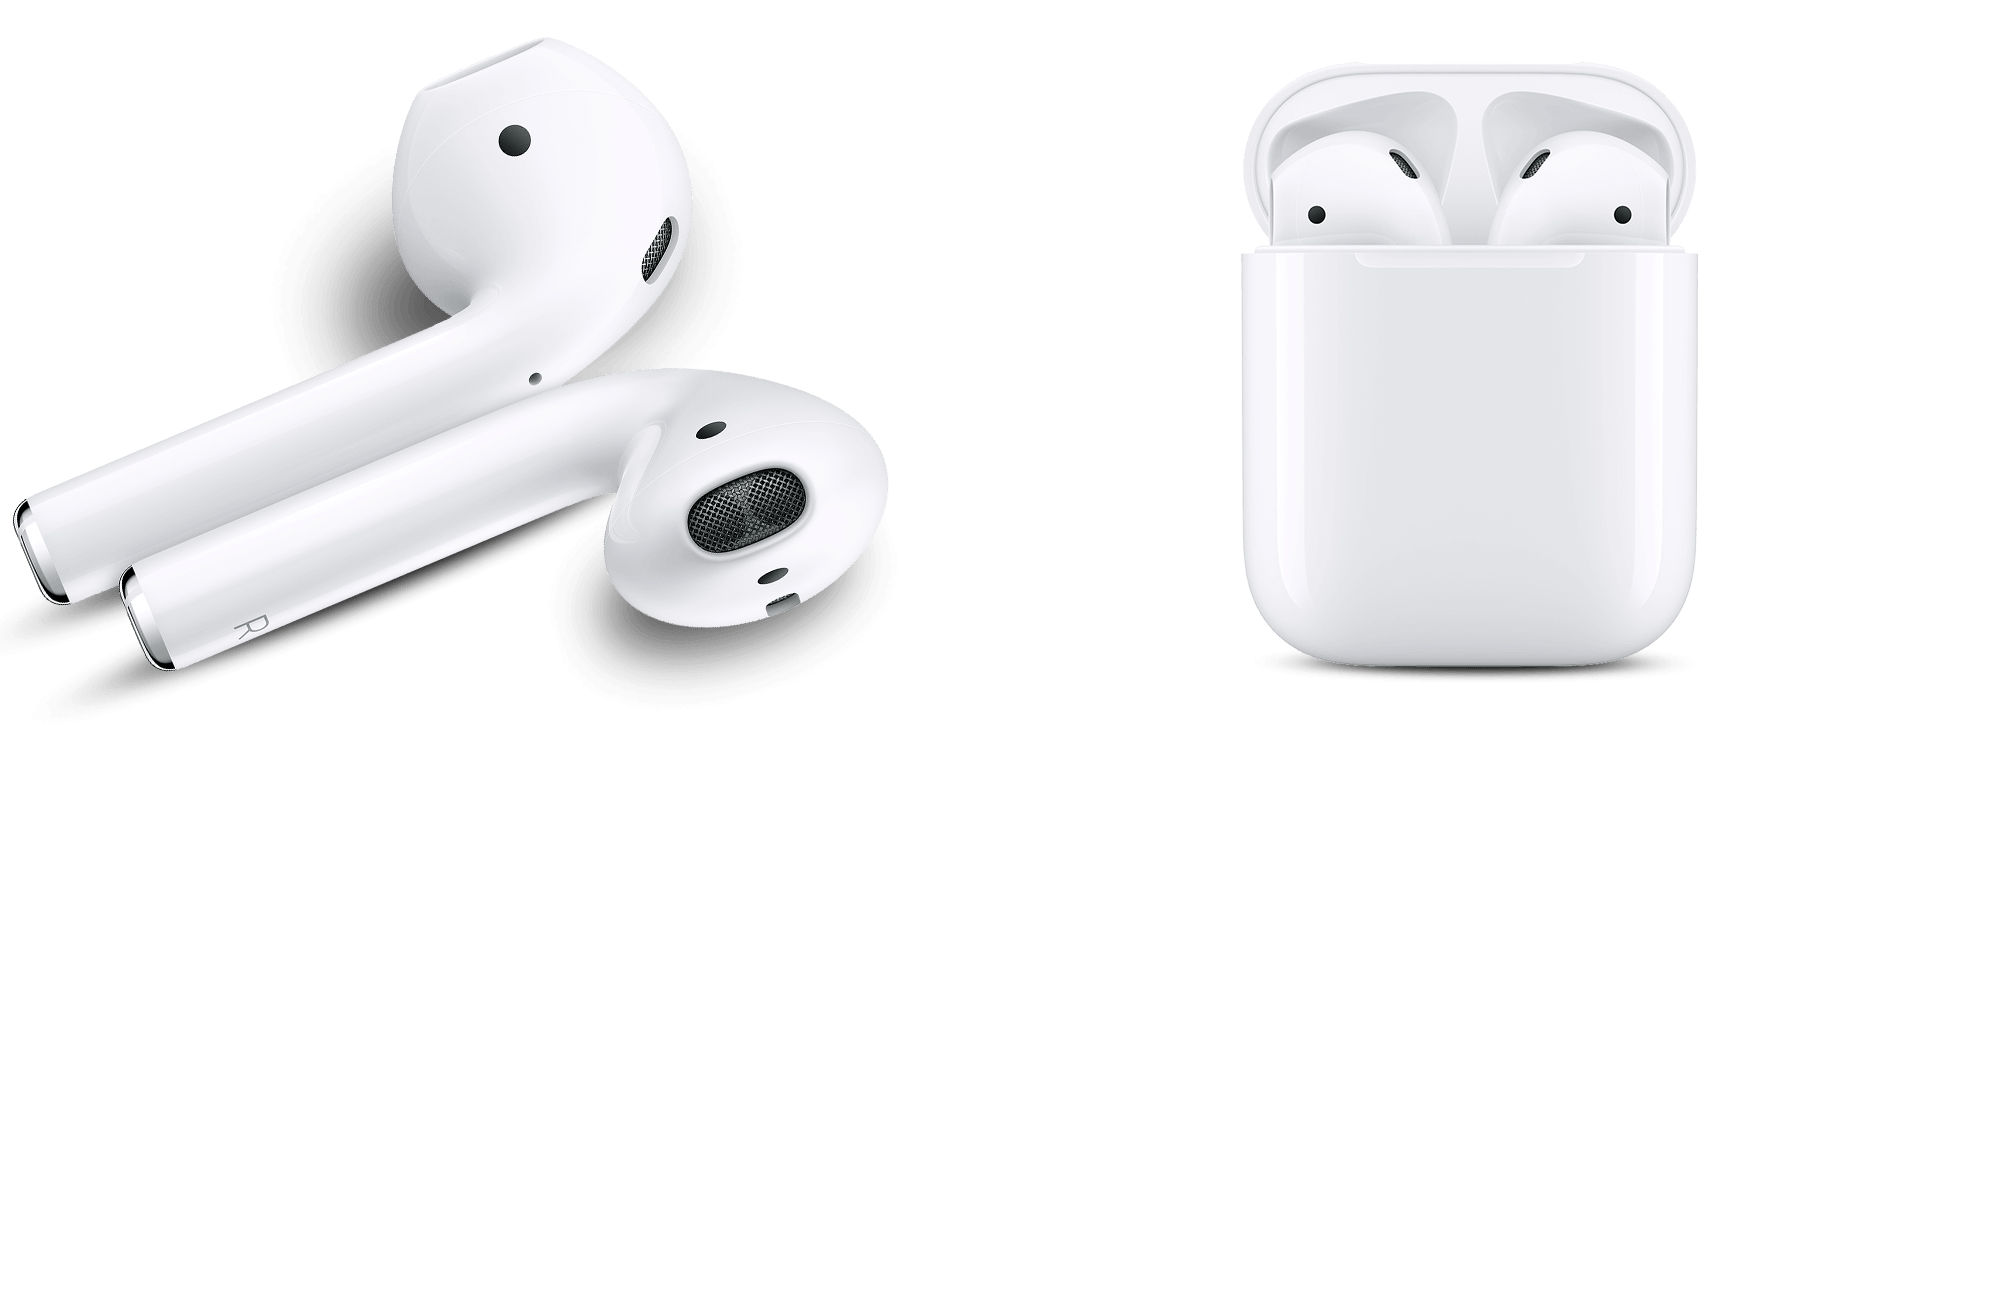 A2564 airpods. Apple AIRPODS 2 White. Наушники TWS Apple AIRPODS 3 белый. Наушники TWS Apple AIRPODS 2 белый. Наушники Apple Earpods Pro 2.